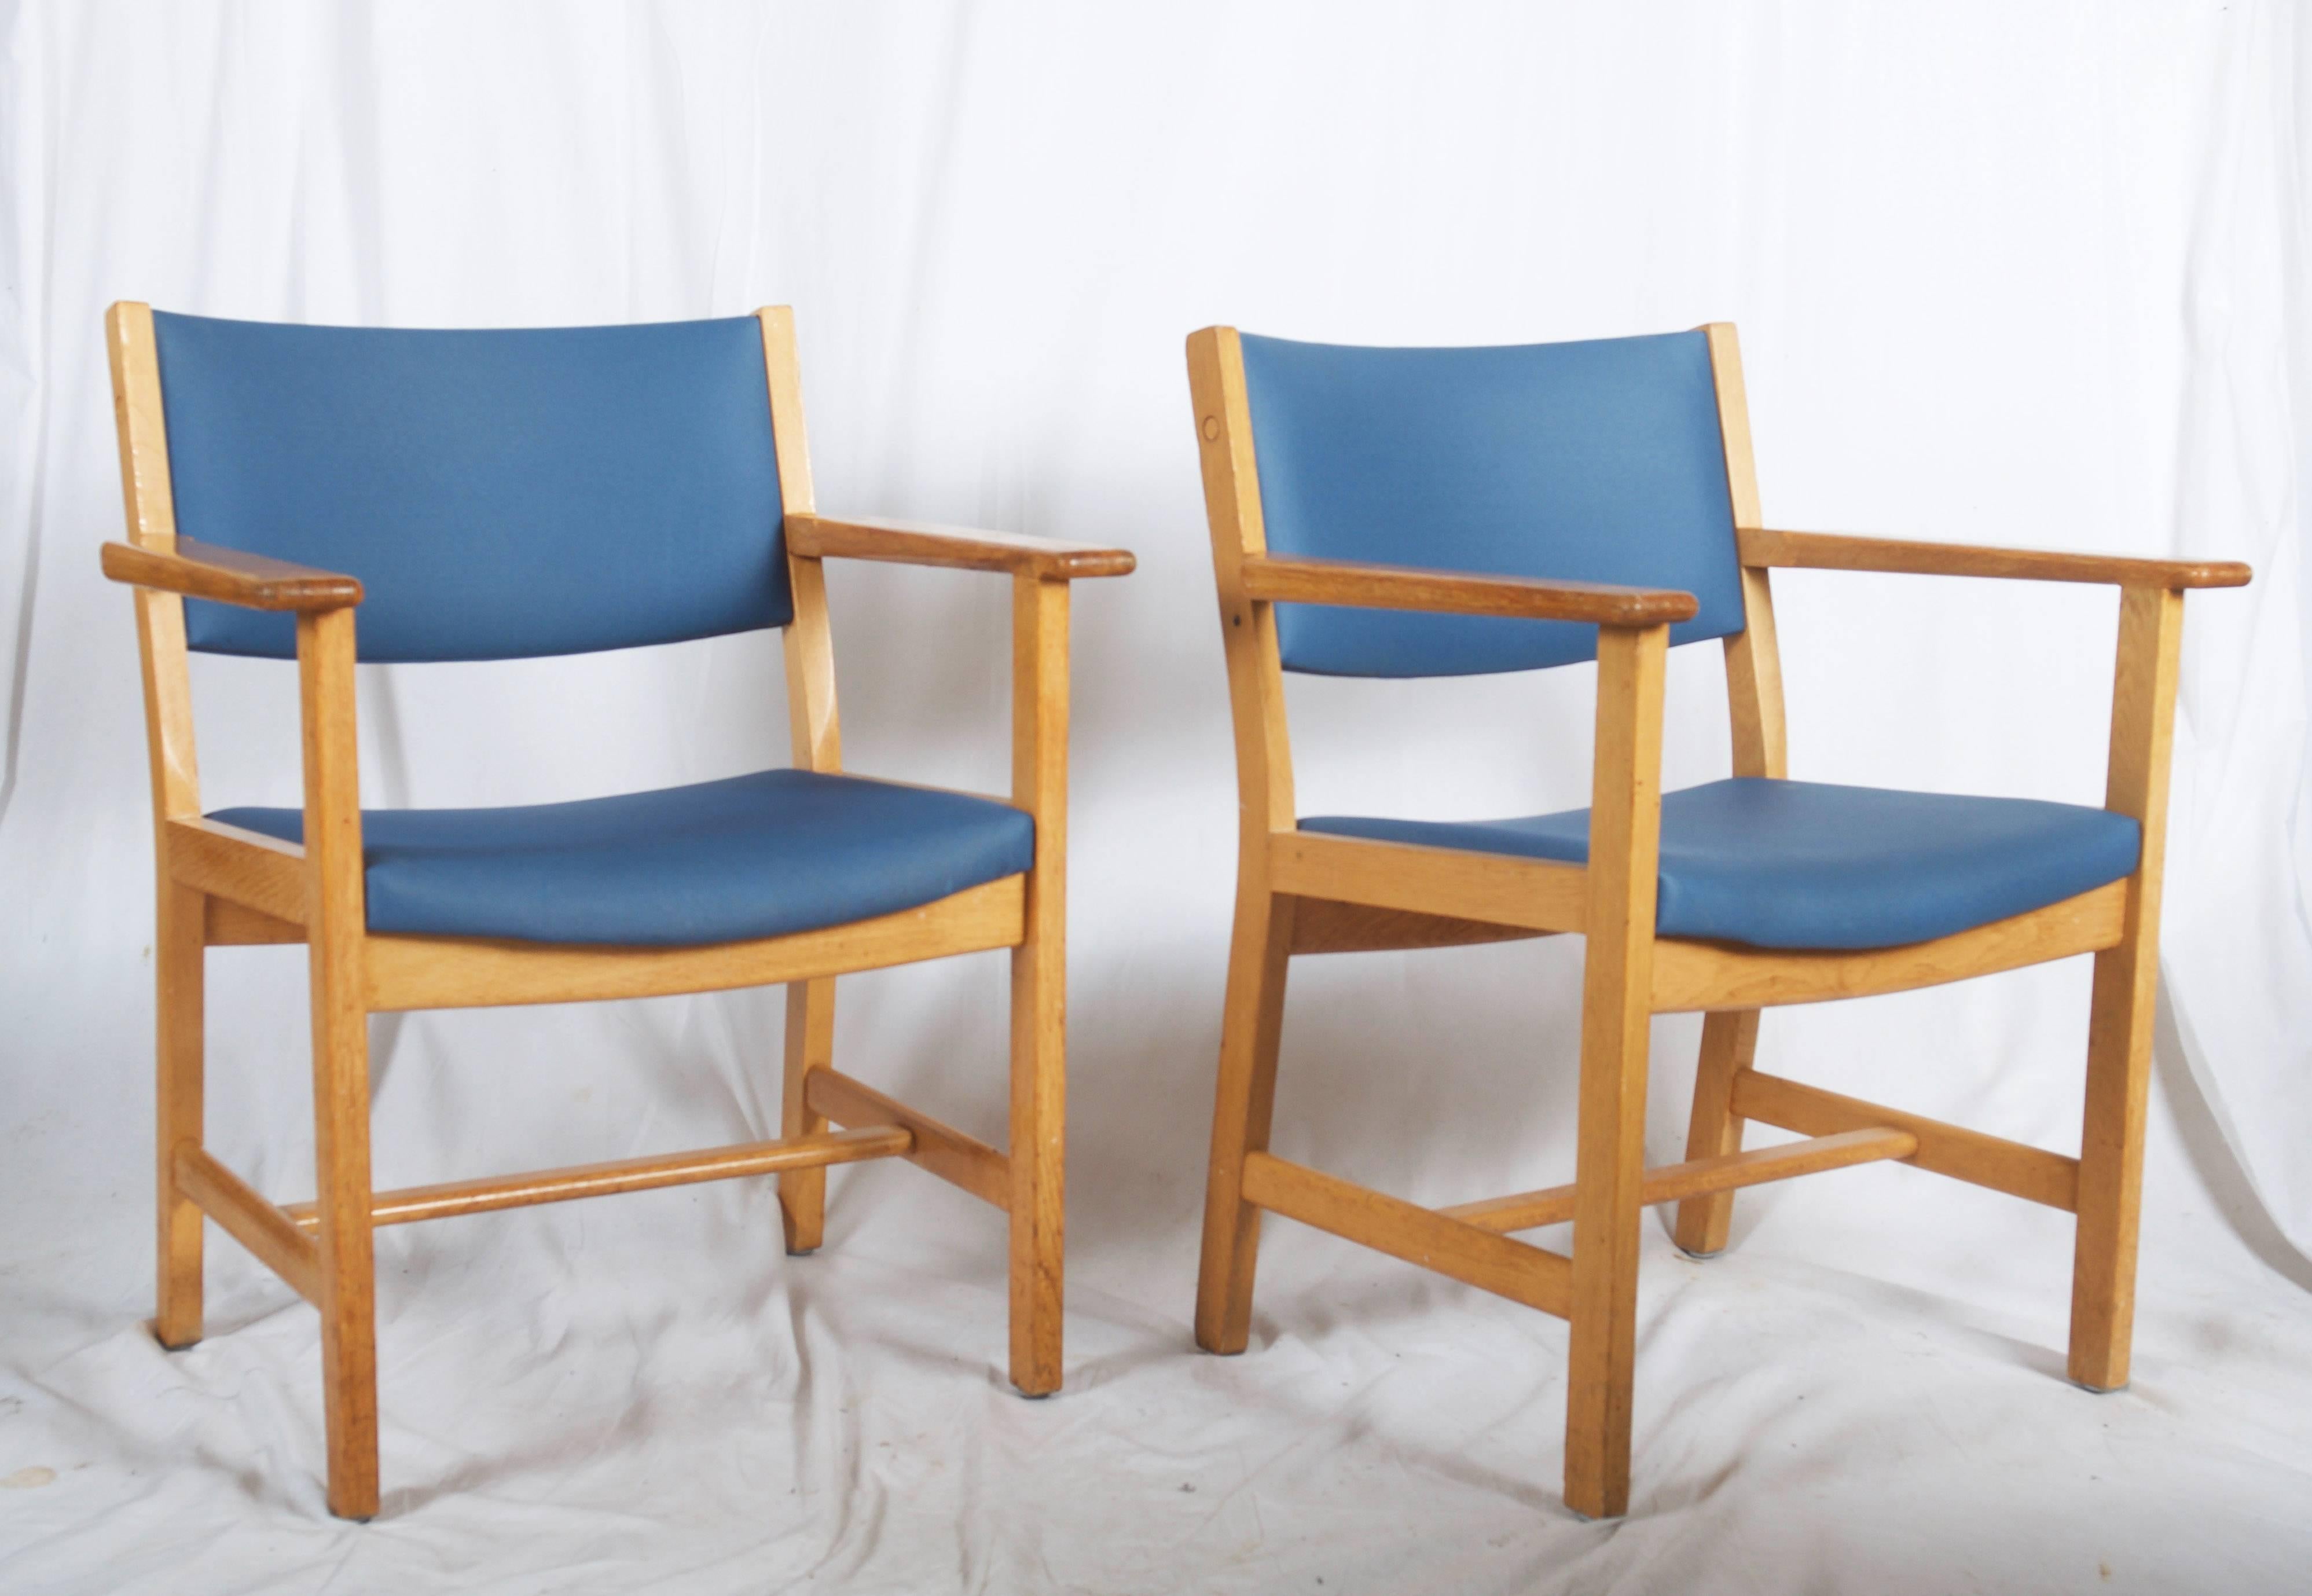 Oak frame lacquered upholster with blue fabric, designed by Hans Wegner for GETAMA in the 1960s.
On request also a full restoration and new upholstery possible. (additional 250Euro/piece + fabric) 
Up to 12 pieces available.